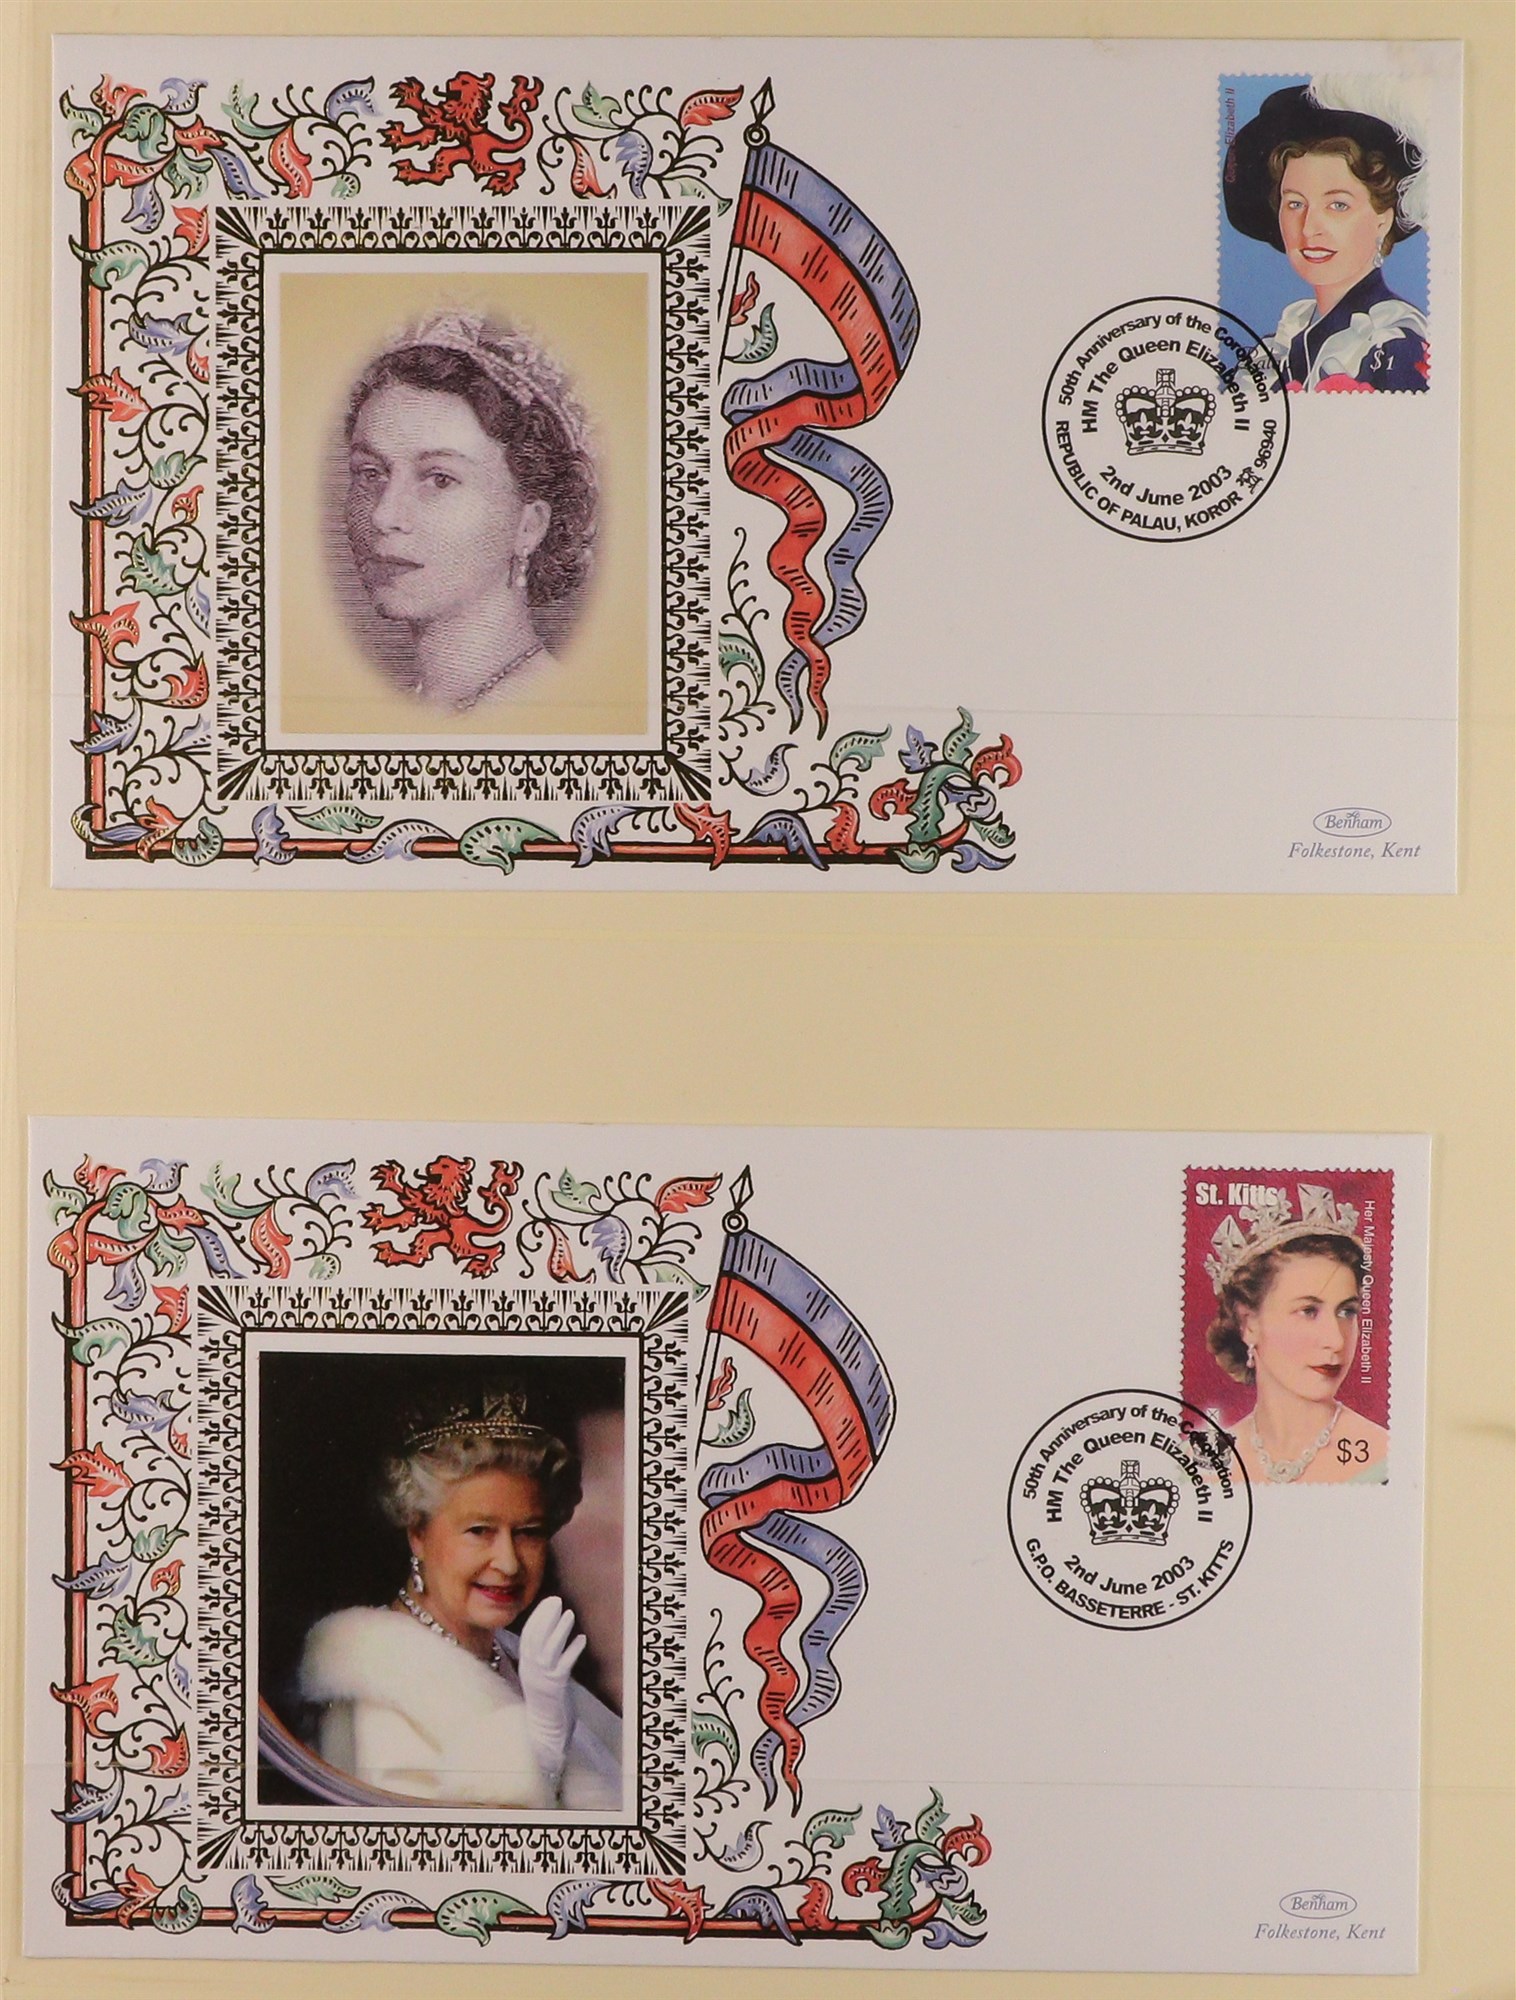 COLLECTIONS & ACCUMULATIONS 2003 CORONATION ANNIVERSARY British commonwealth collection of special - Image 5 of 5